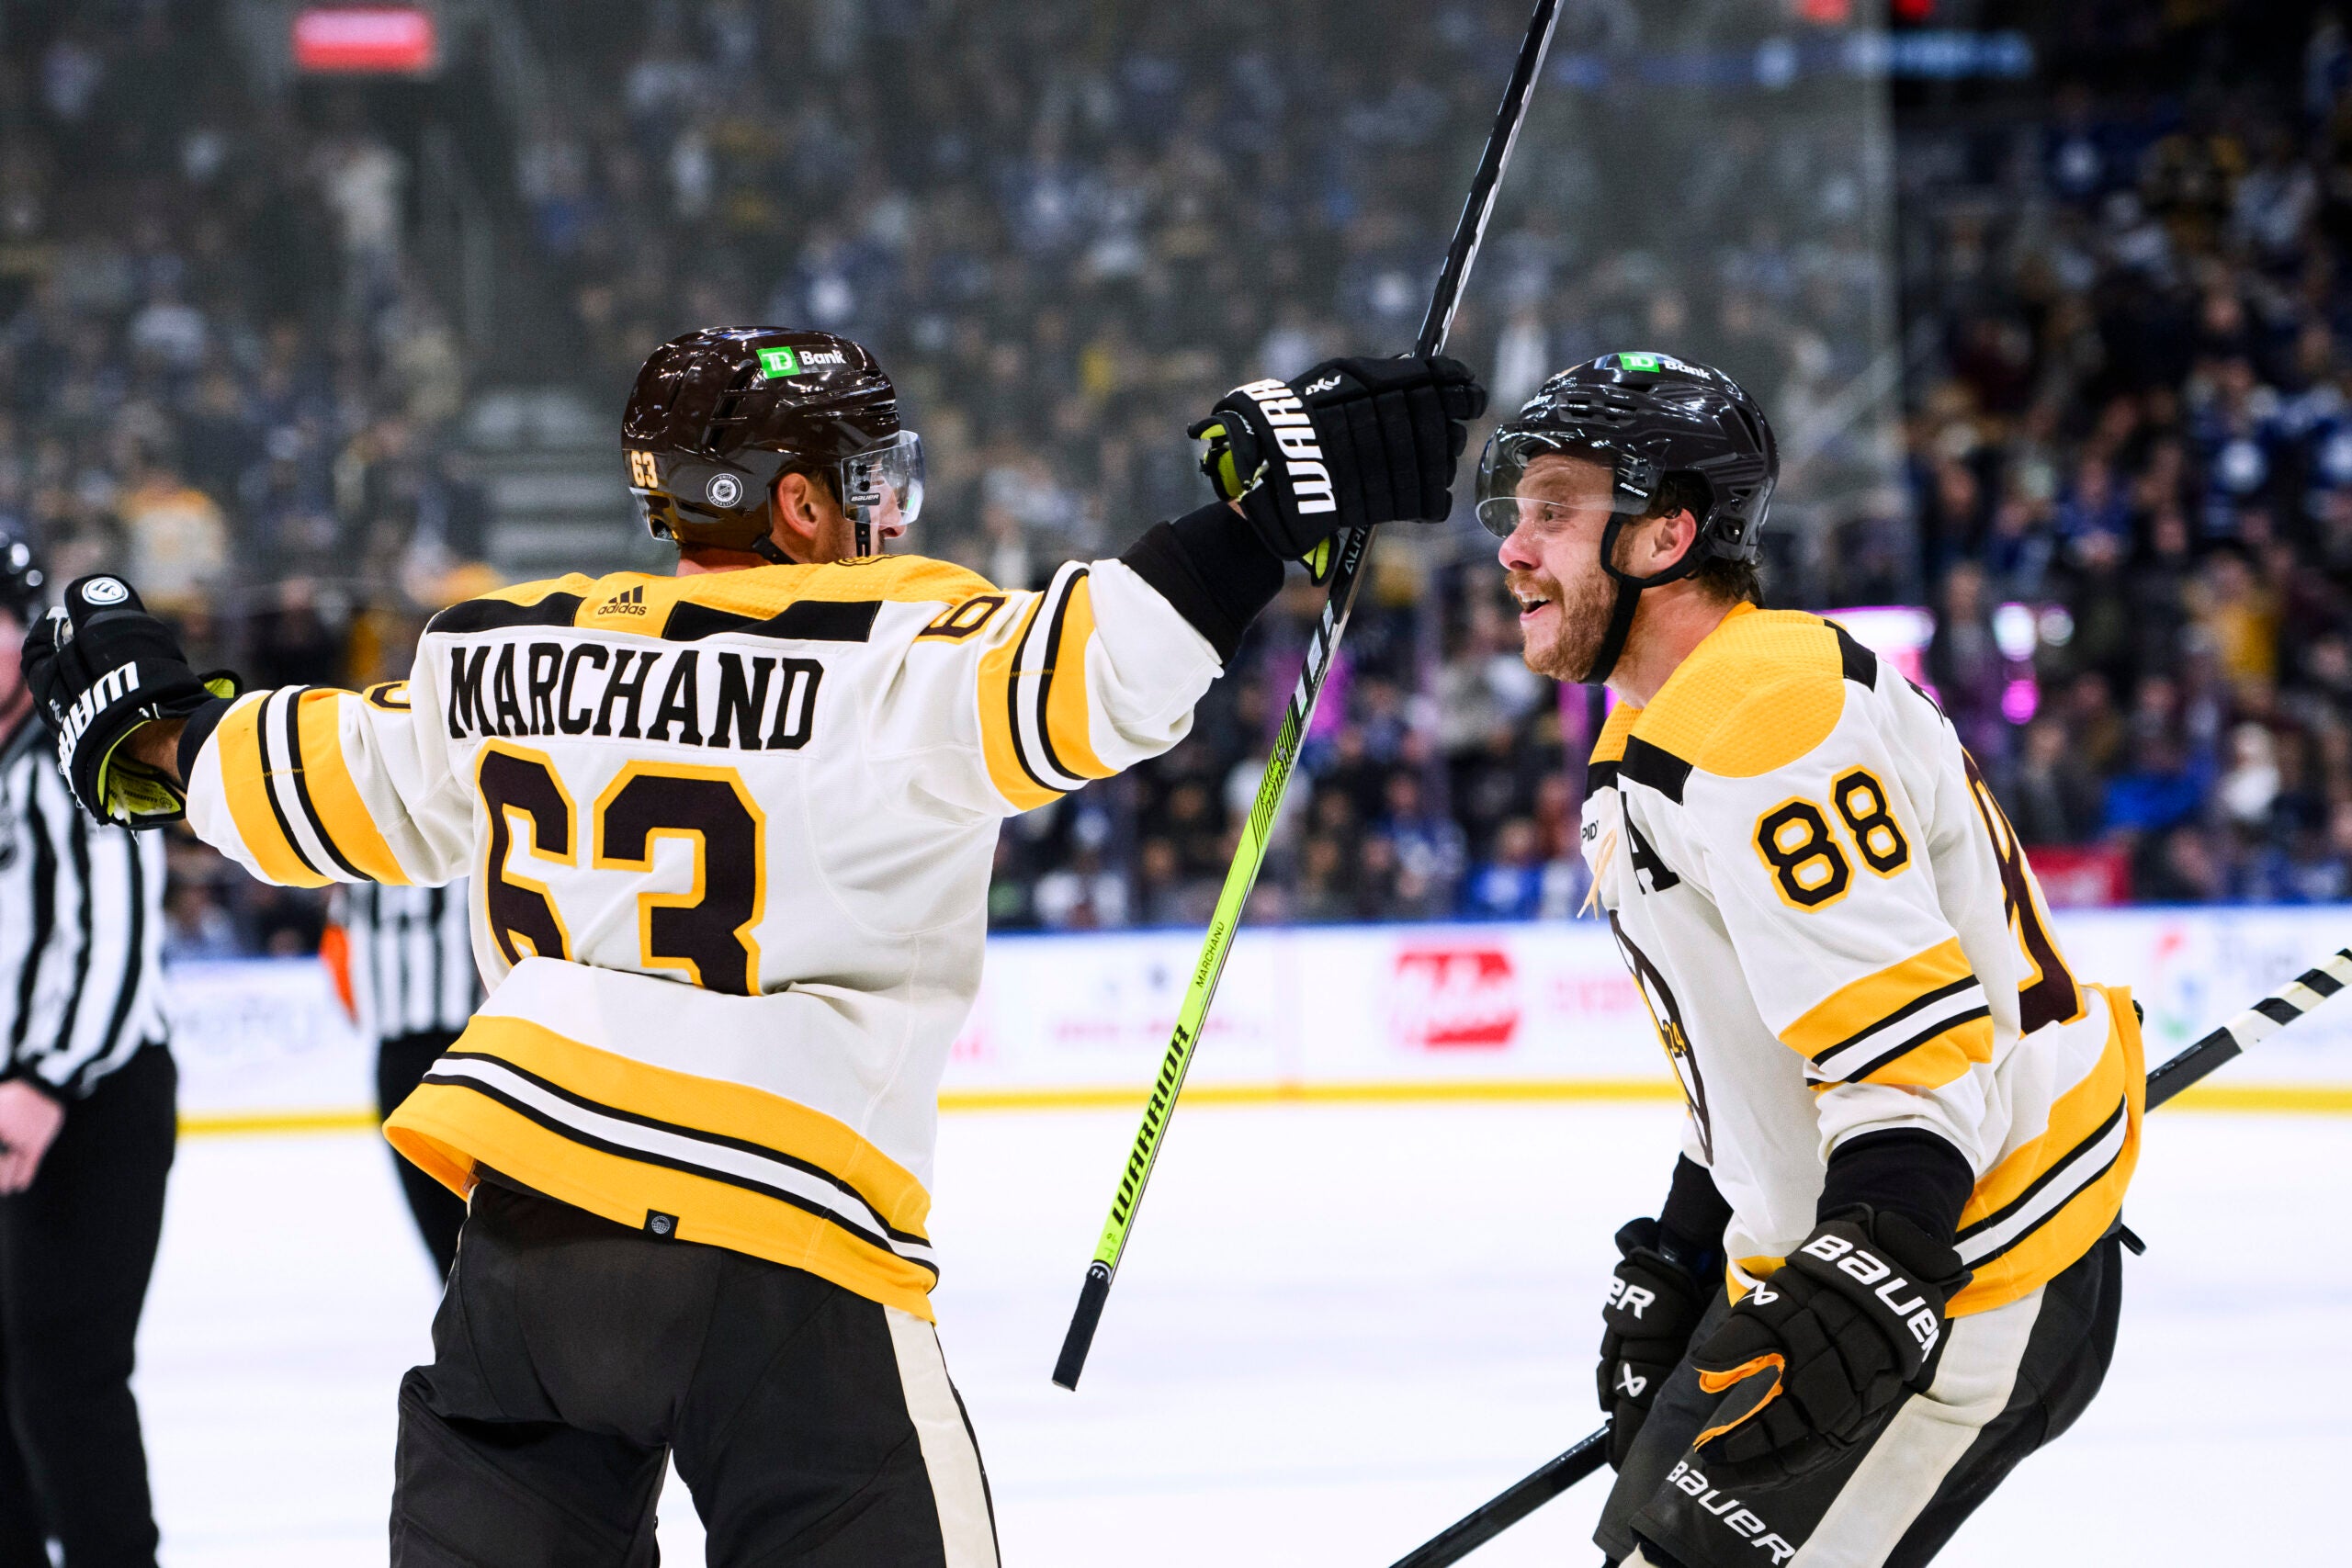 Bruins-Isles takeaways: What we learned from Boston's 'biggest win